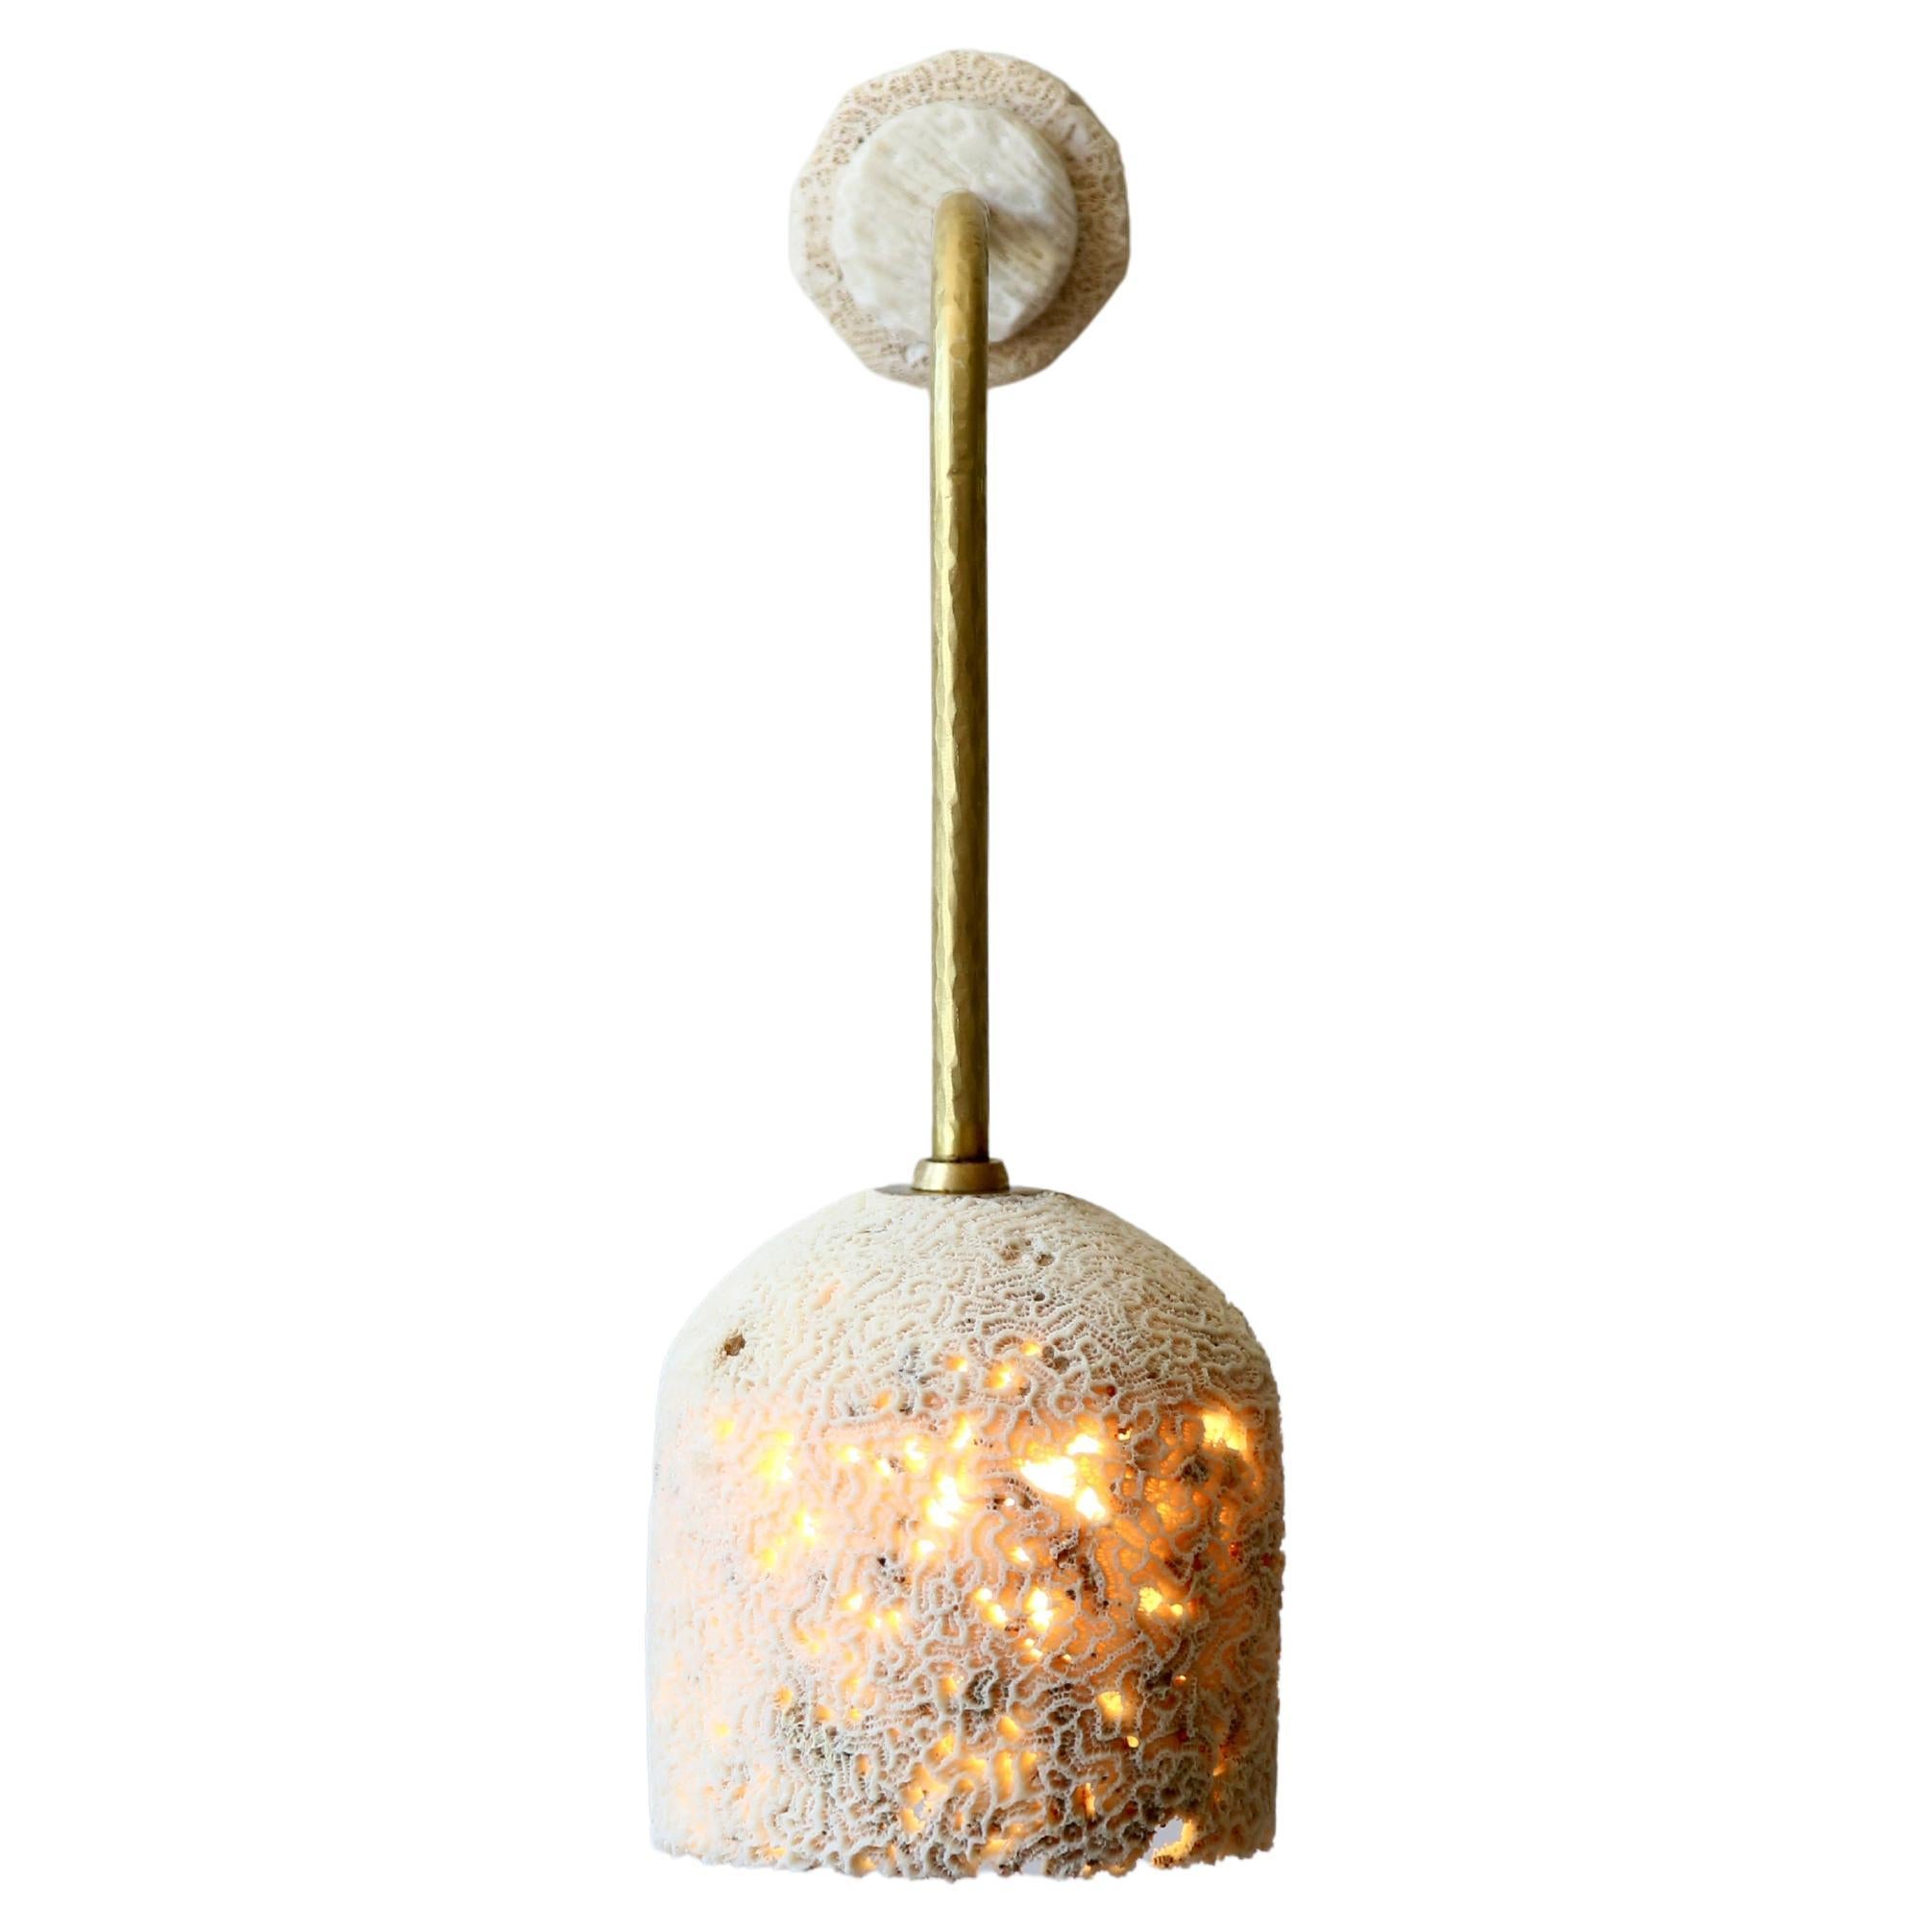 Fossil Coral Dome Arc Wall Light (Medium) Rustic Chic, Earthy, Minimal, Neutral For Sale